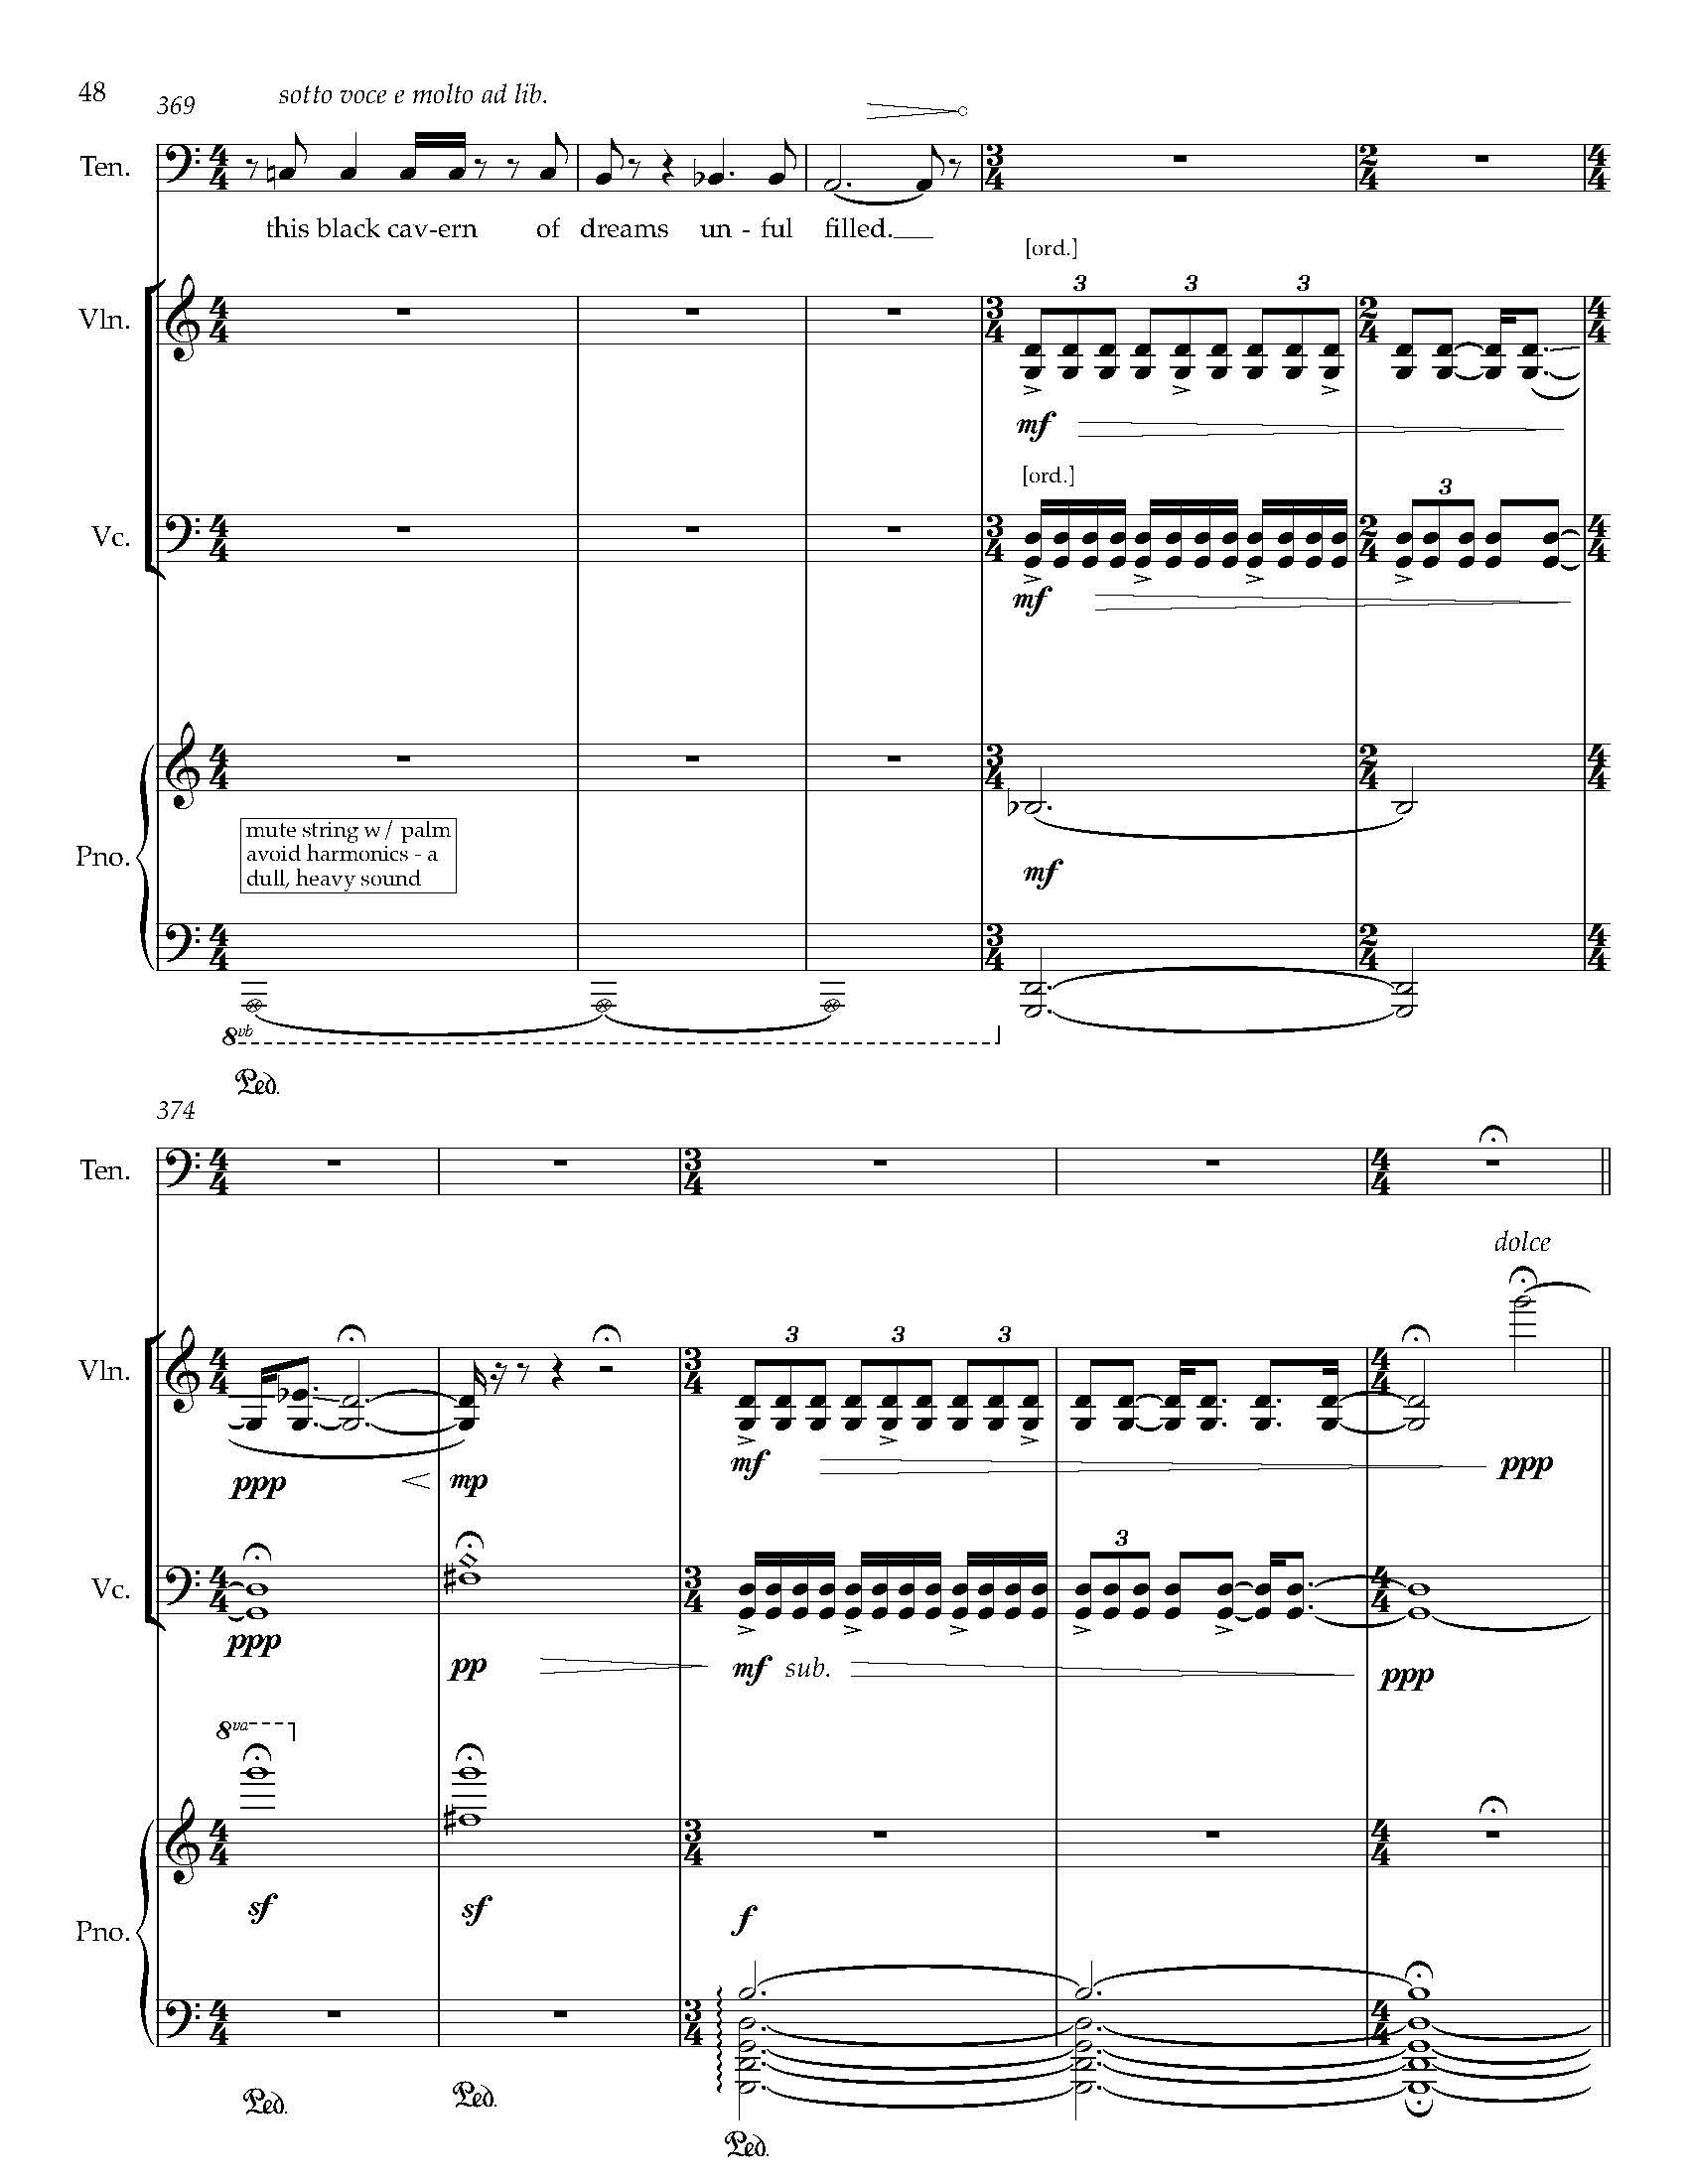 Gursky Songs - Complete Score_Page_56.jpg